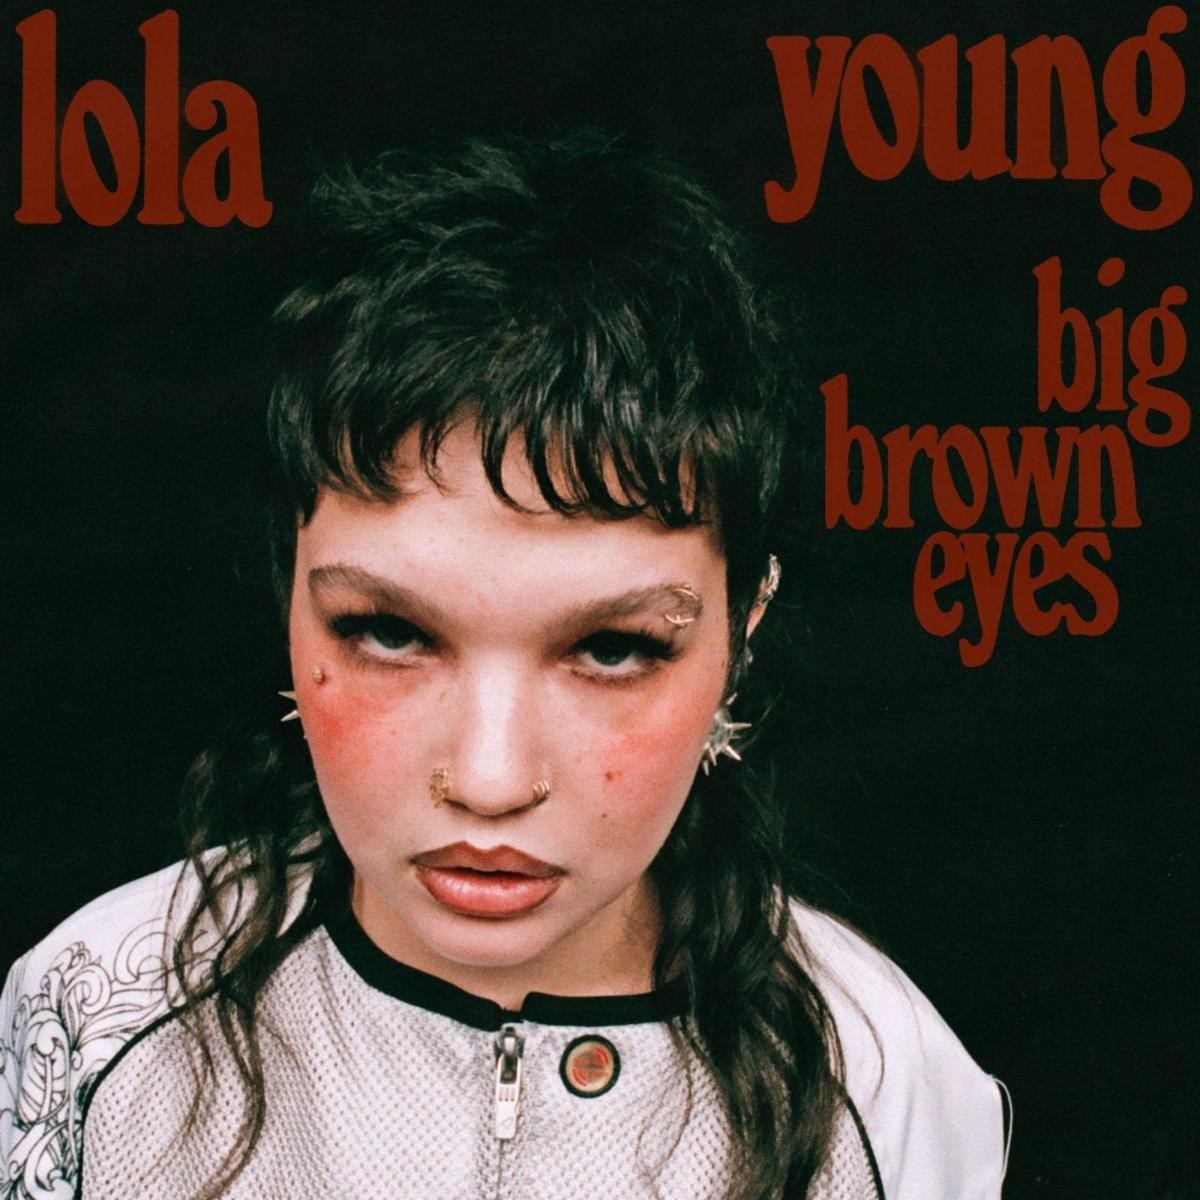 Lola Young shares new single 'Big Brown Eyes' + currently on sold out US headline tour imprintent.org/lola-young-sha… #IMPRINTent #lolayoung #music